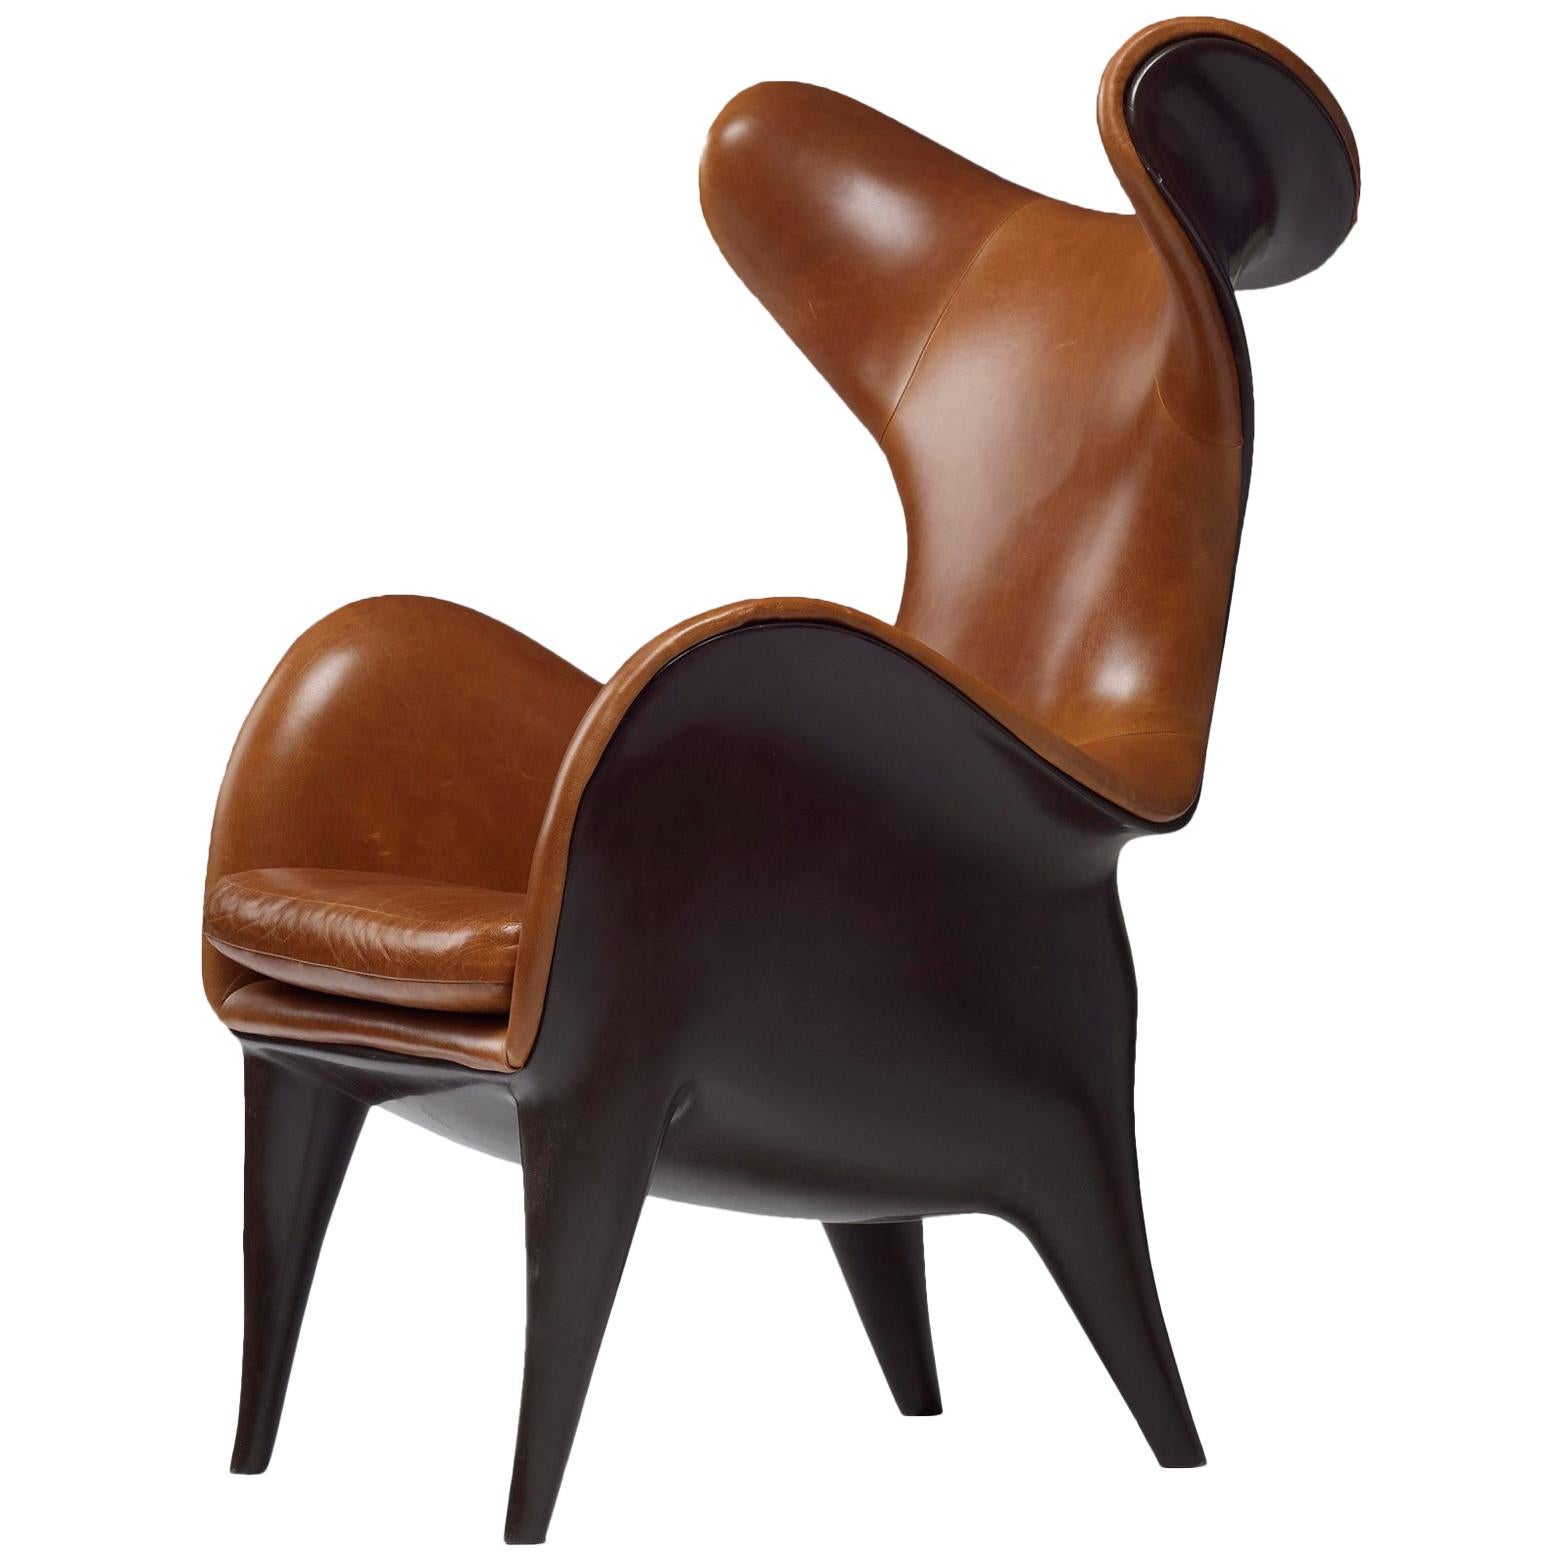 Frankie Wingback Chair/ Lounge Chair, Leather+Resin, Jordan Mozer, USA, 2007/18 For Sale